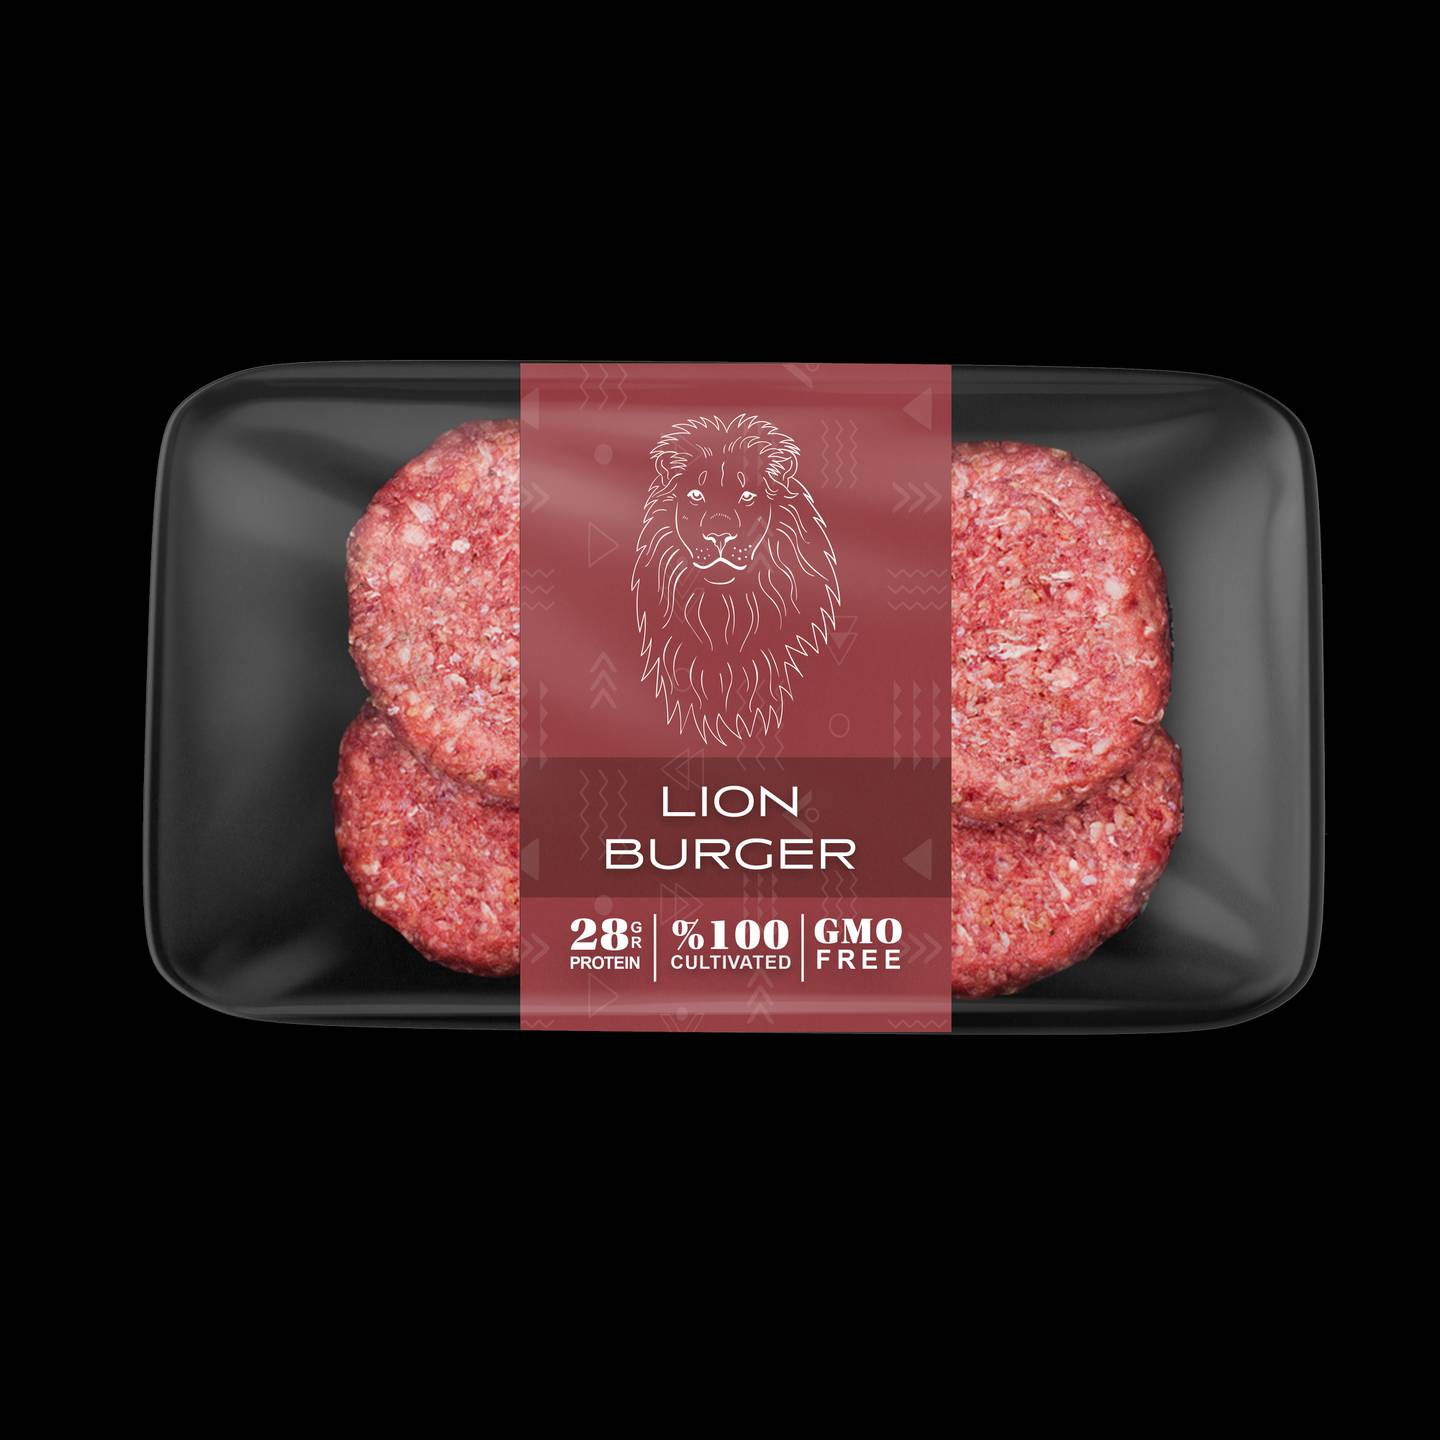 A lion burger is one of the delicacies Primeval Foods hopes 'carnivores will crave'. Photo: Primeval Foods